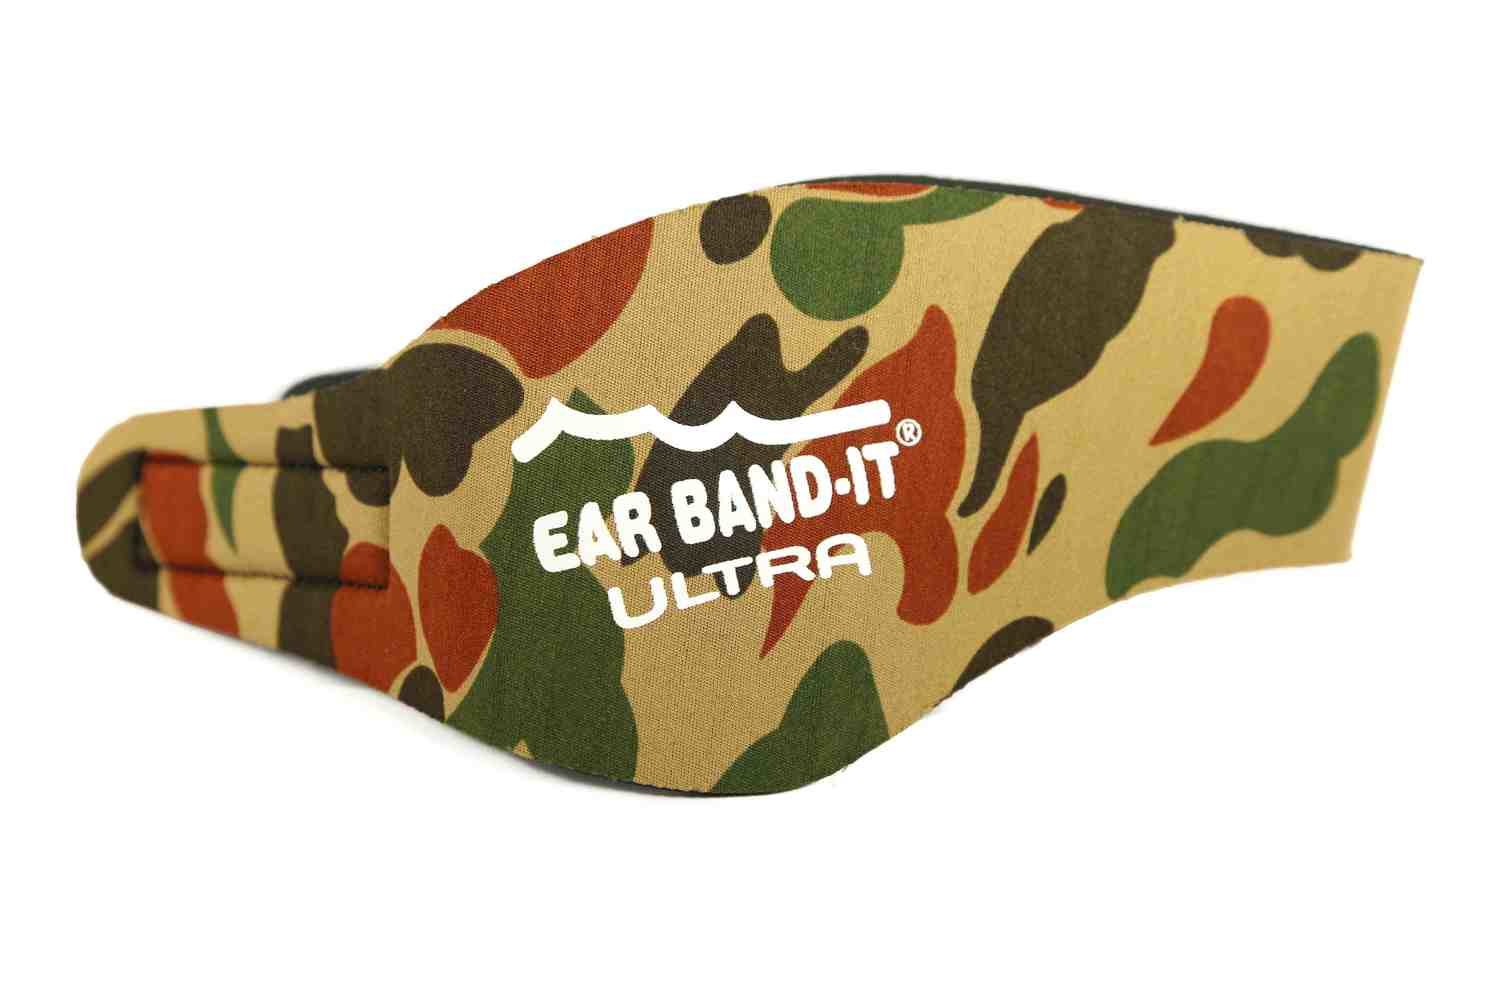 Camo Small size Ear Band-It Ultra with pair of Floating Putty Buddies Ear Plugs